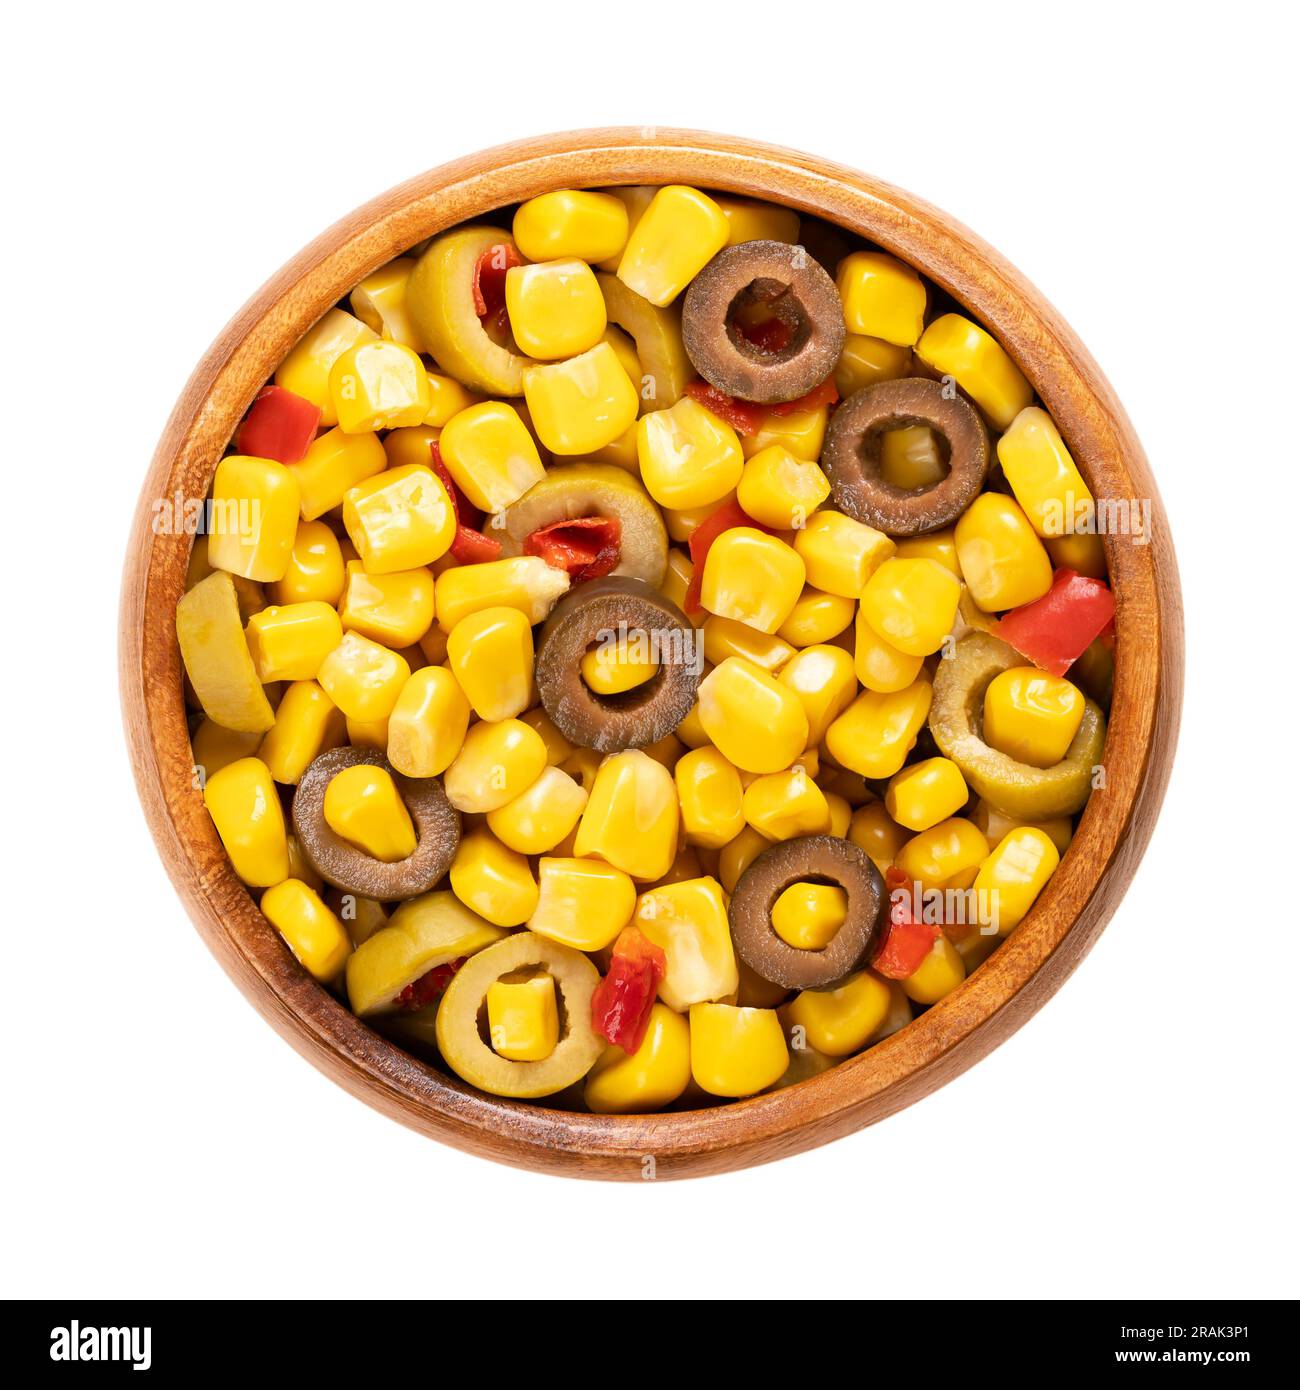 Mix of canned corn, sliced green and black olives and diced red bell pepper, in a wooden bowl. Ready-to-eat Mediterranean maize mix, as a side dish. Stock Photo